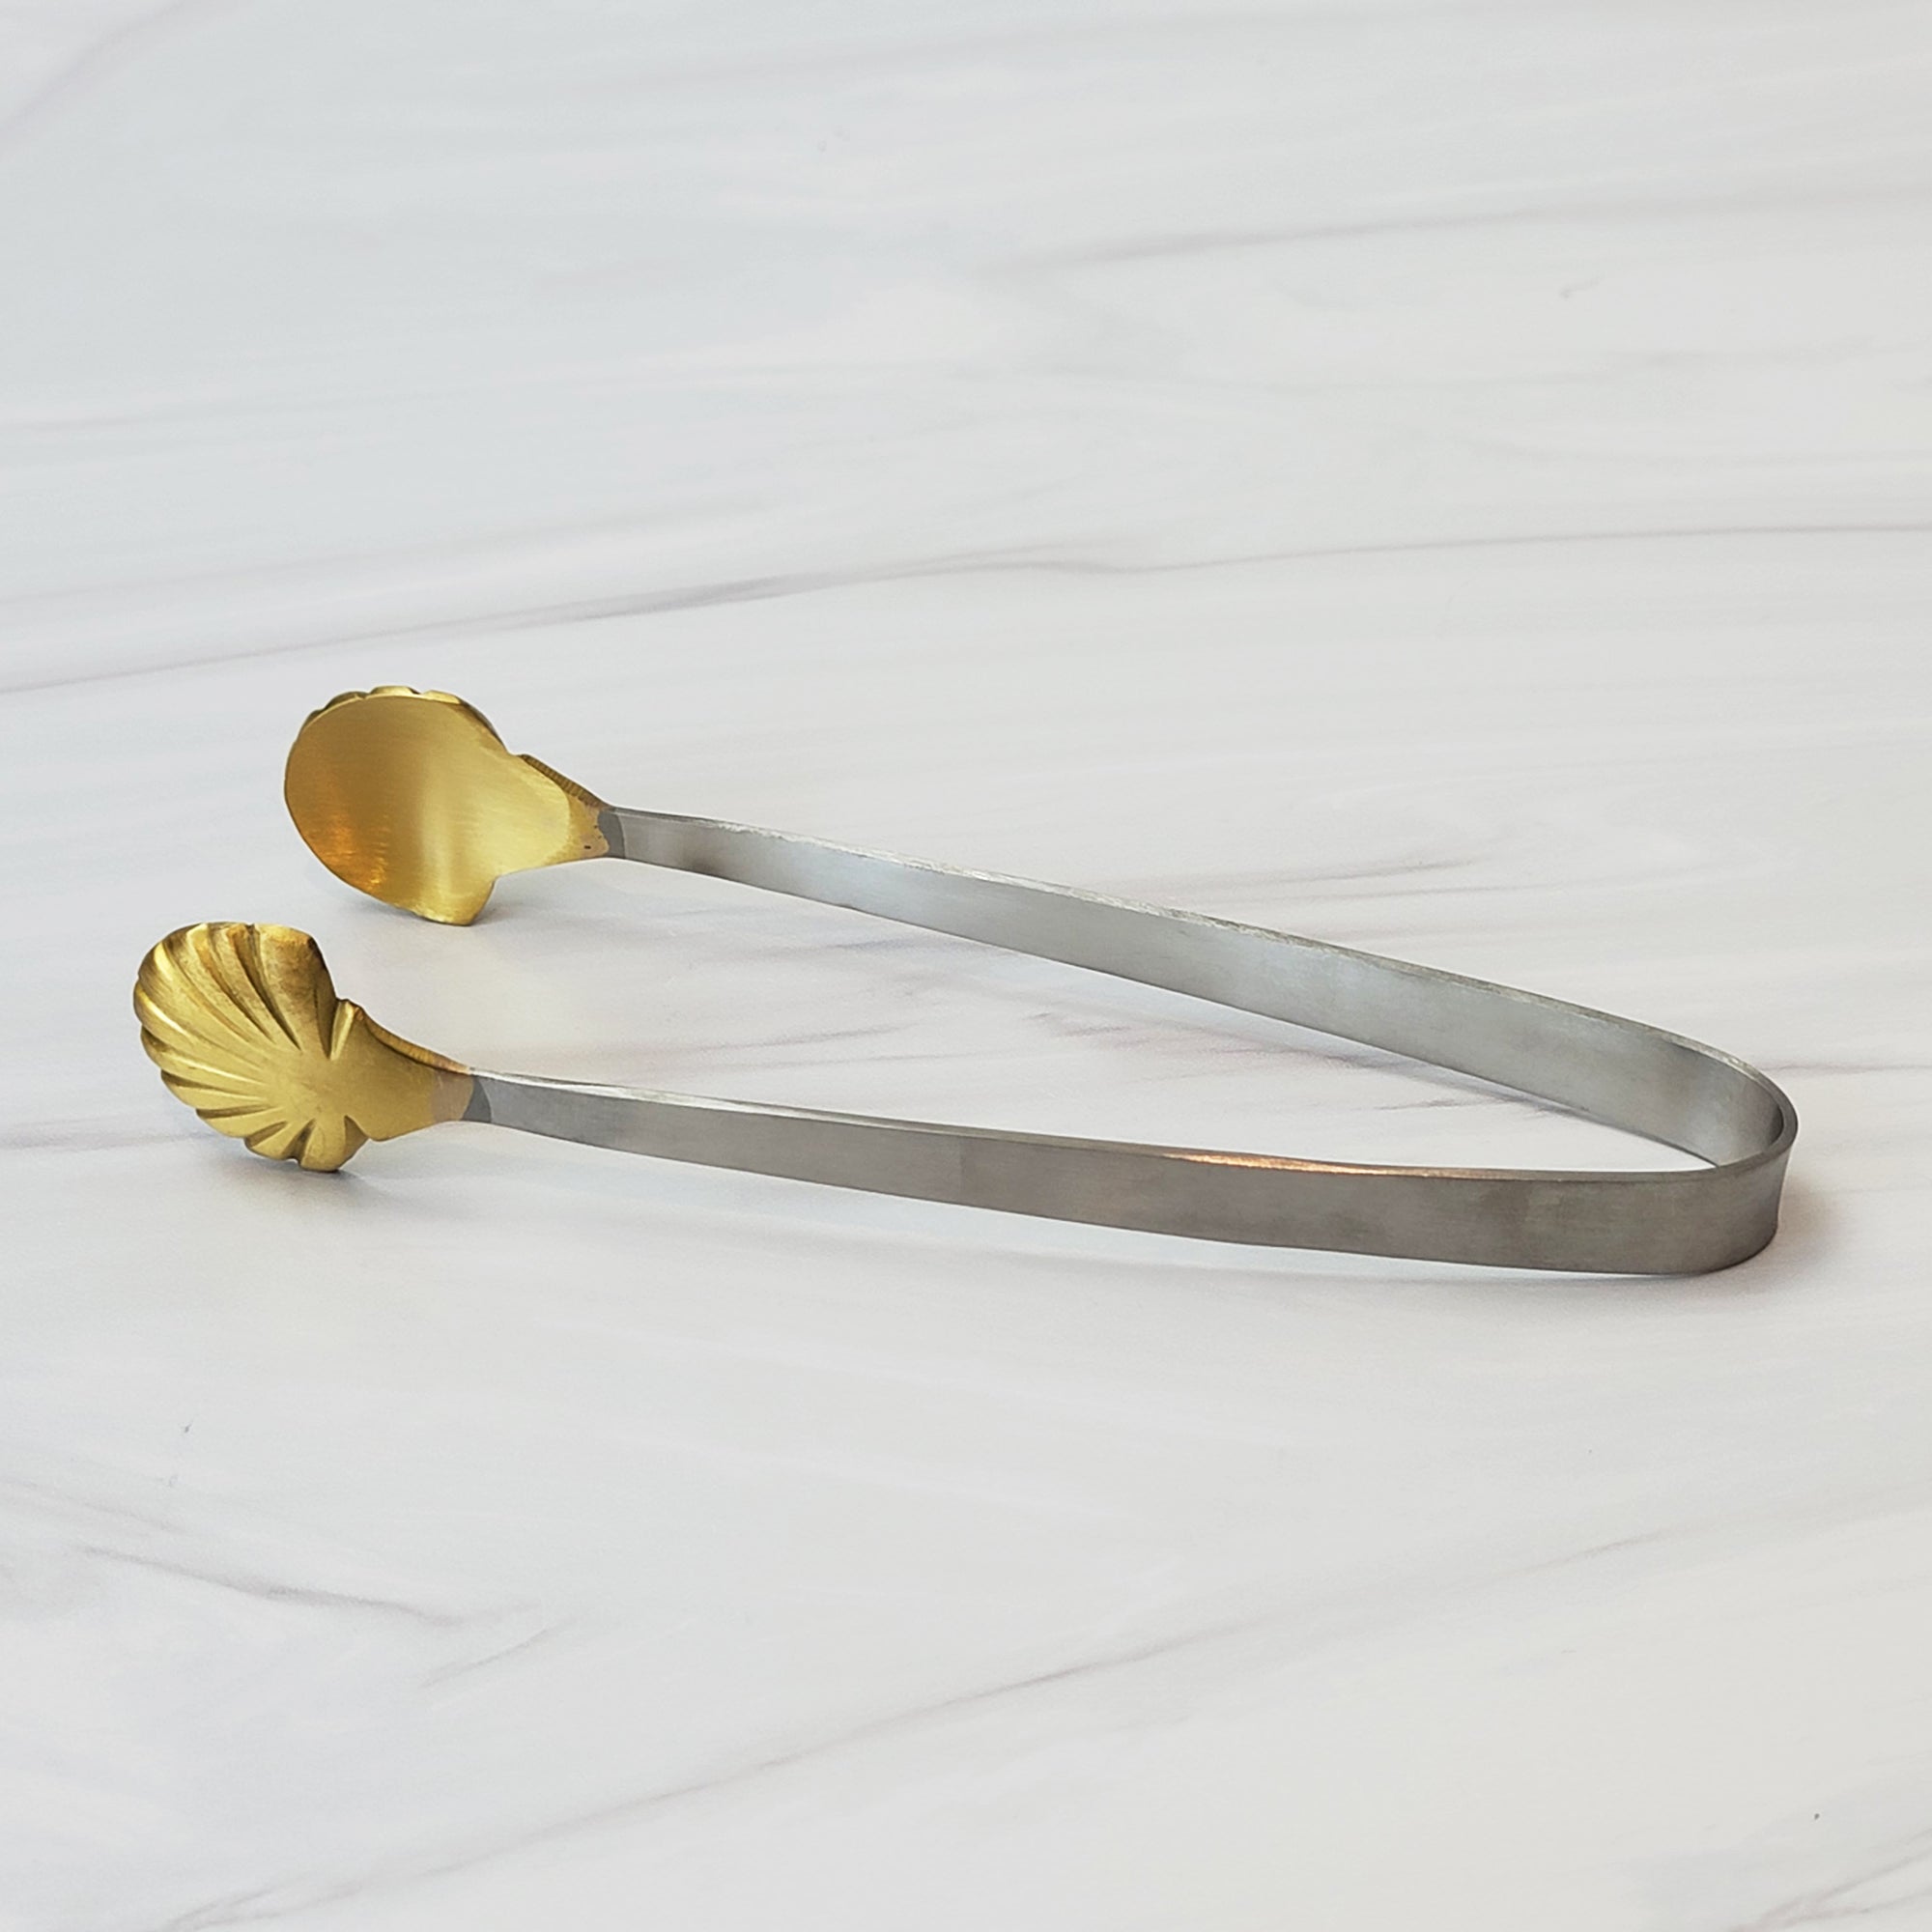 Brass and stainless steel art deco seashell tongs